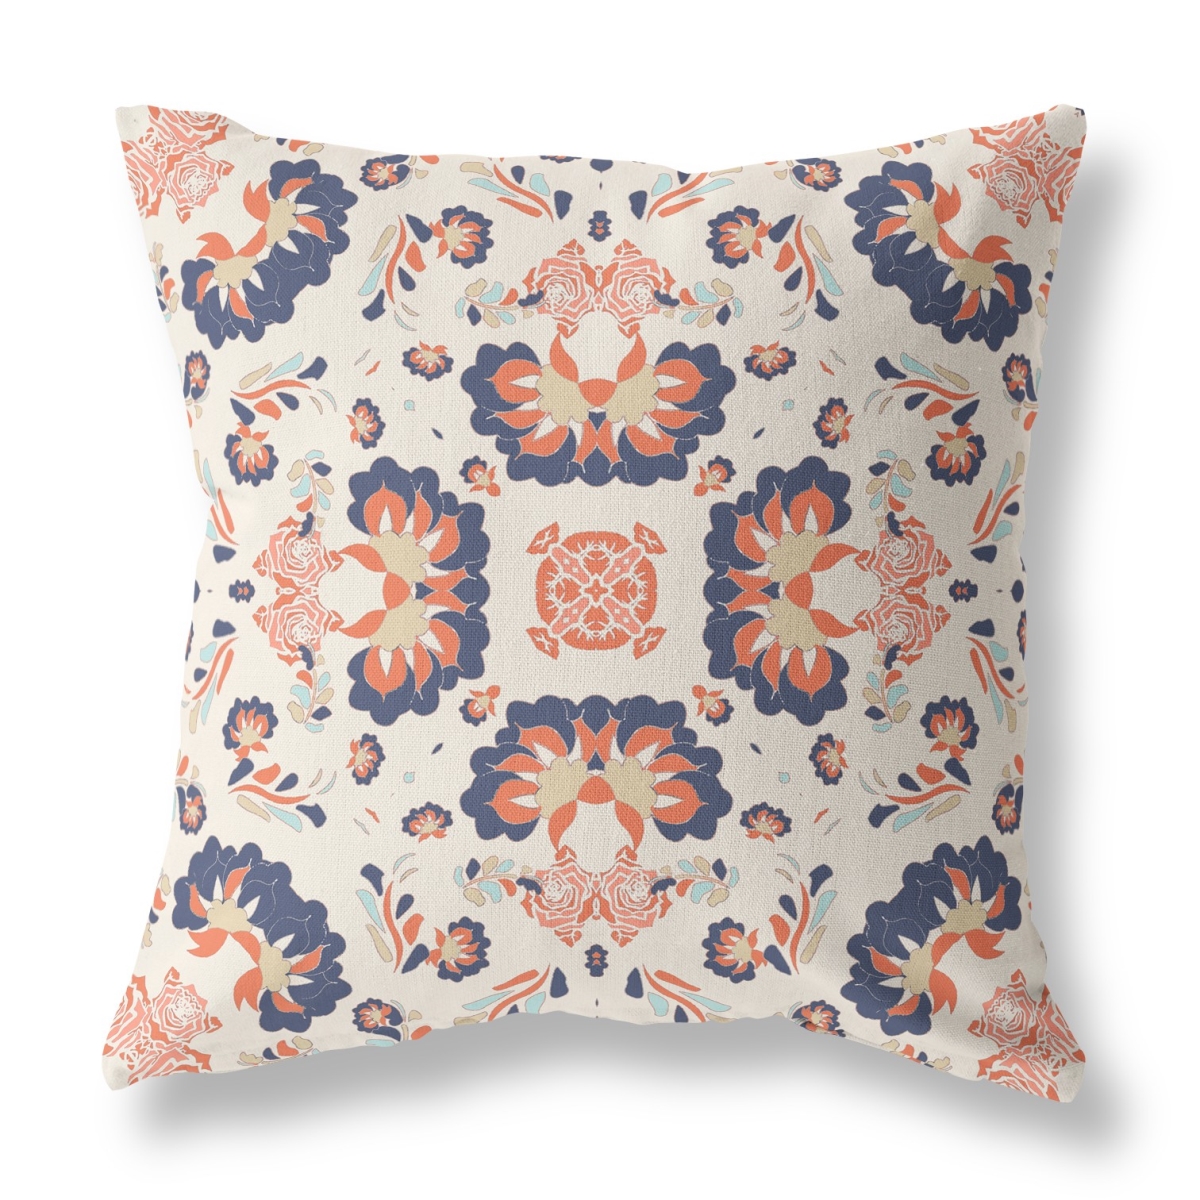 PalaceDesigns 5 x 16 x 16 in. Off White & Blue Zippered Geometric Indoor & Outdoor Throw Pillow